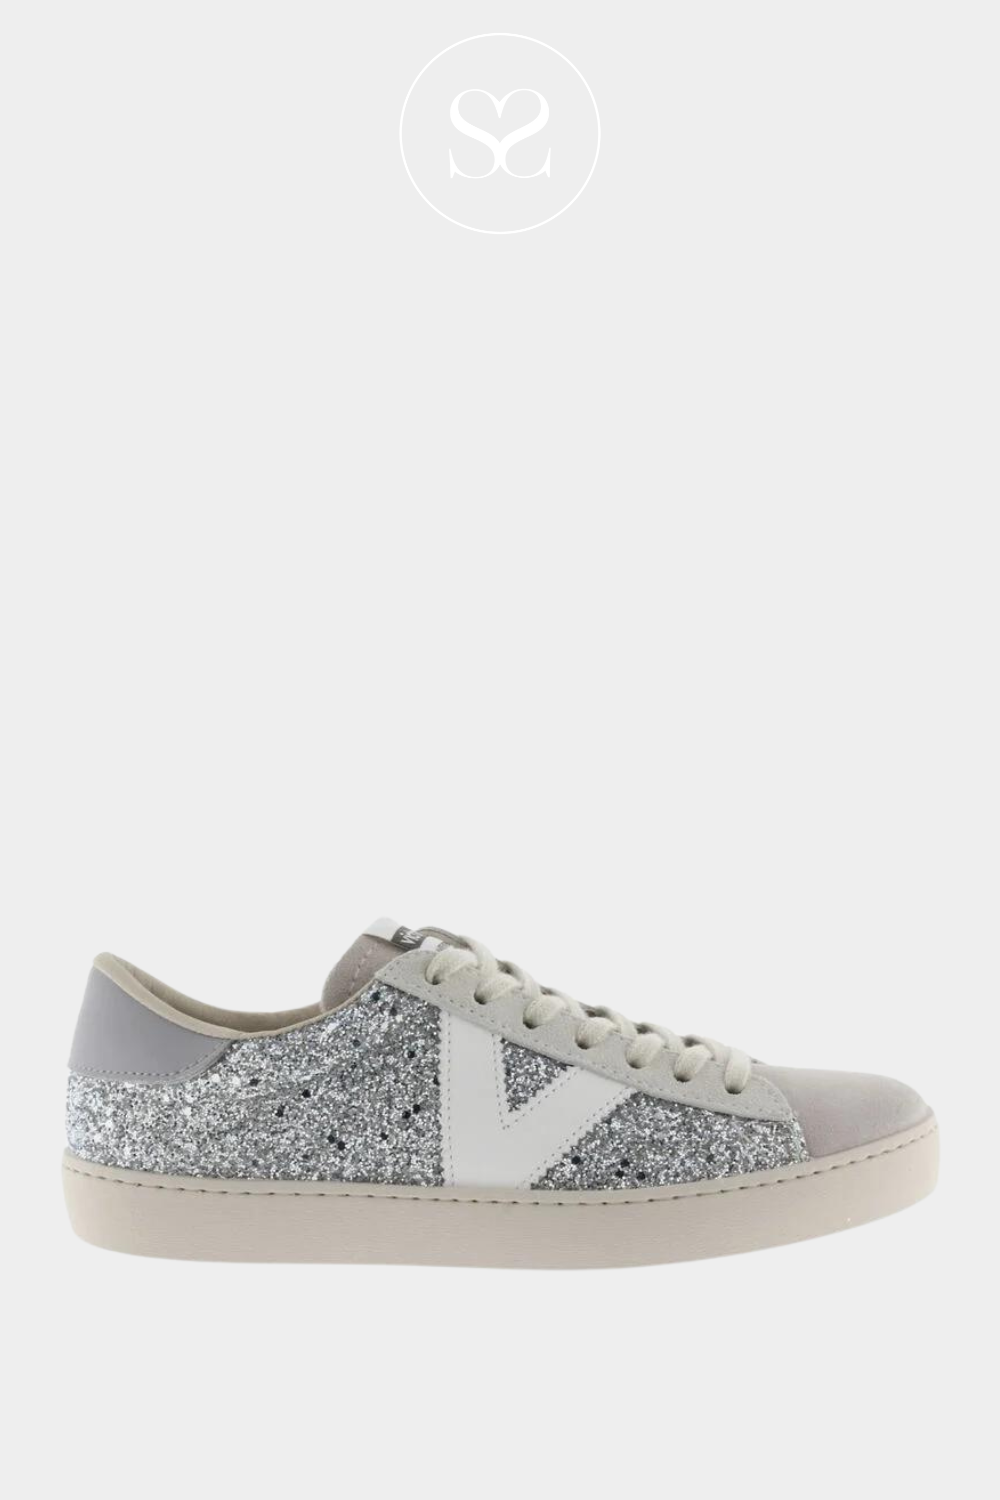 VICTORIA 1-126195 ENCRUSTED SILVER TRAINERS